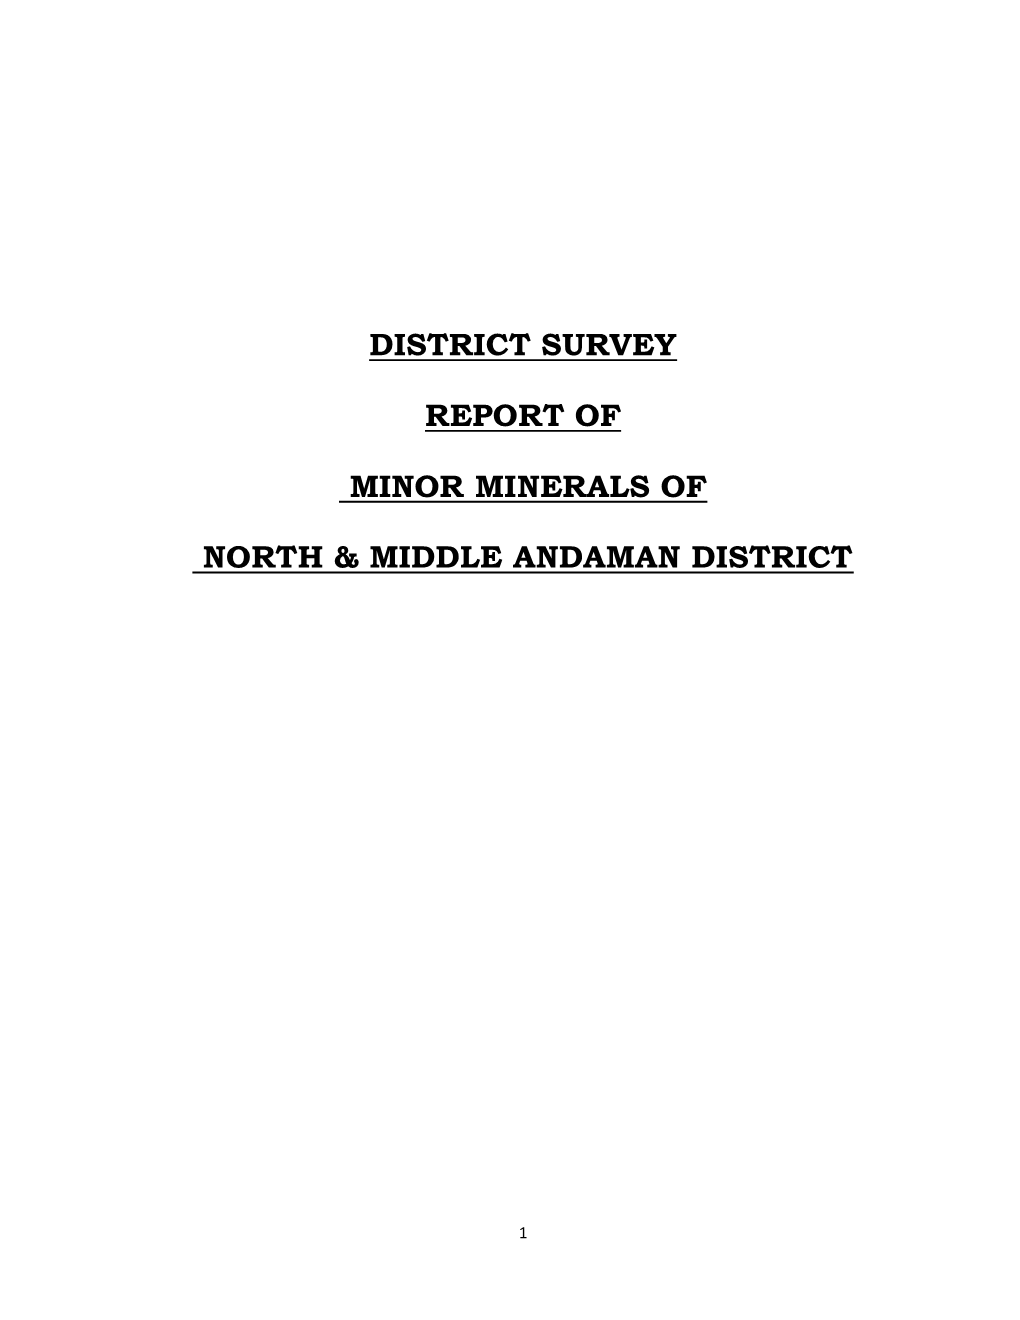 District Survey Report of Minor Minerals of North